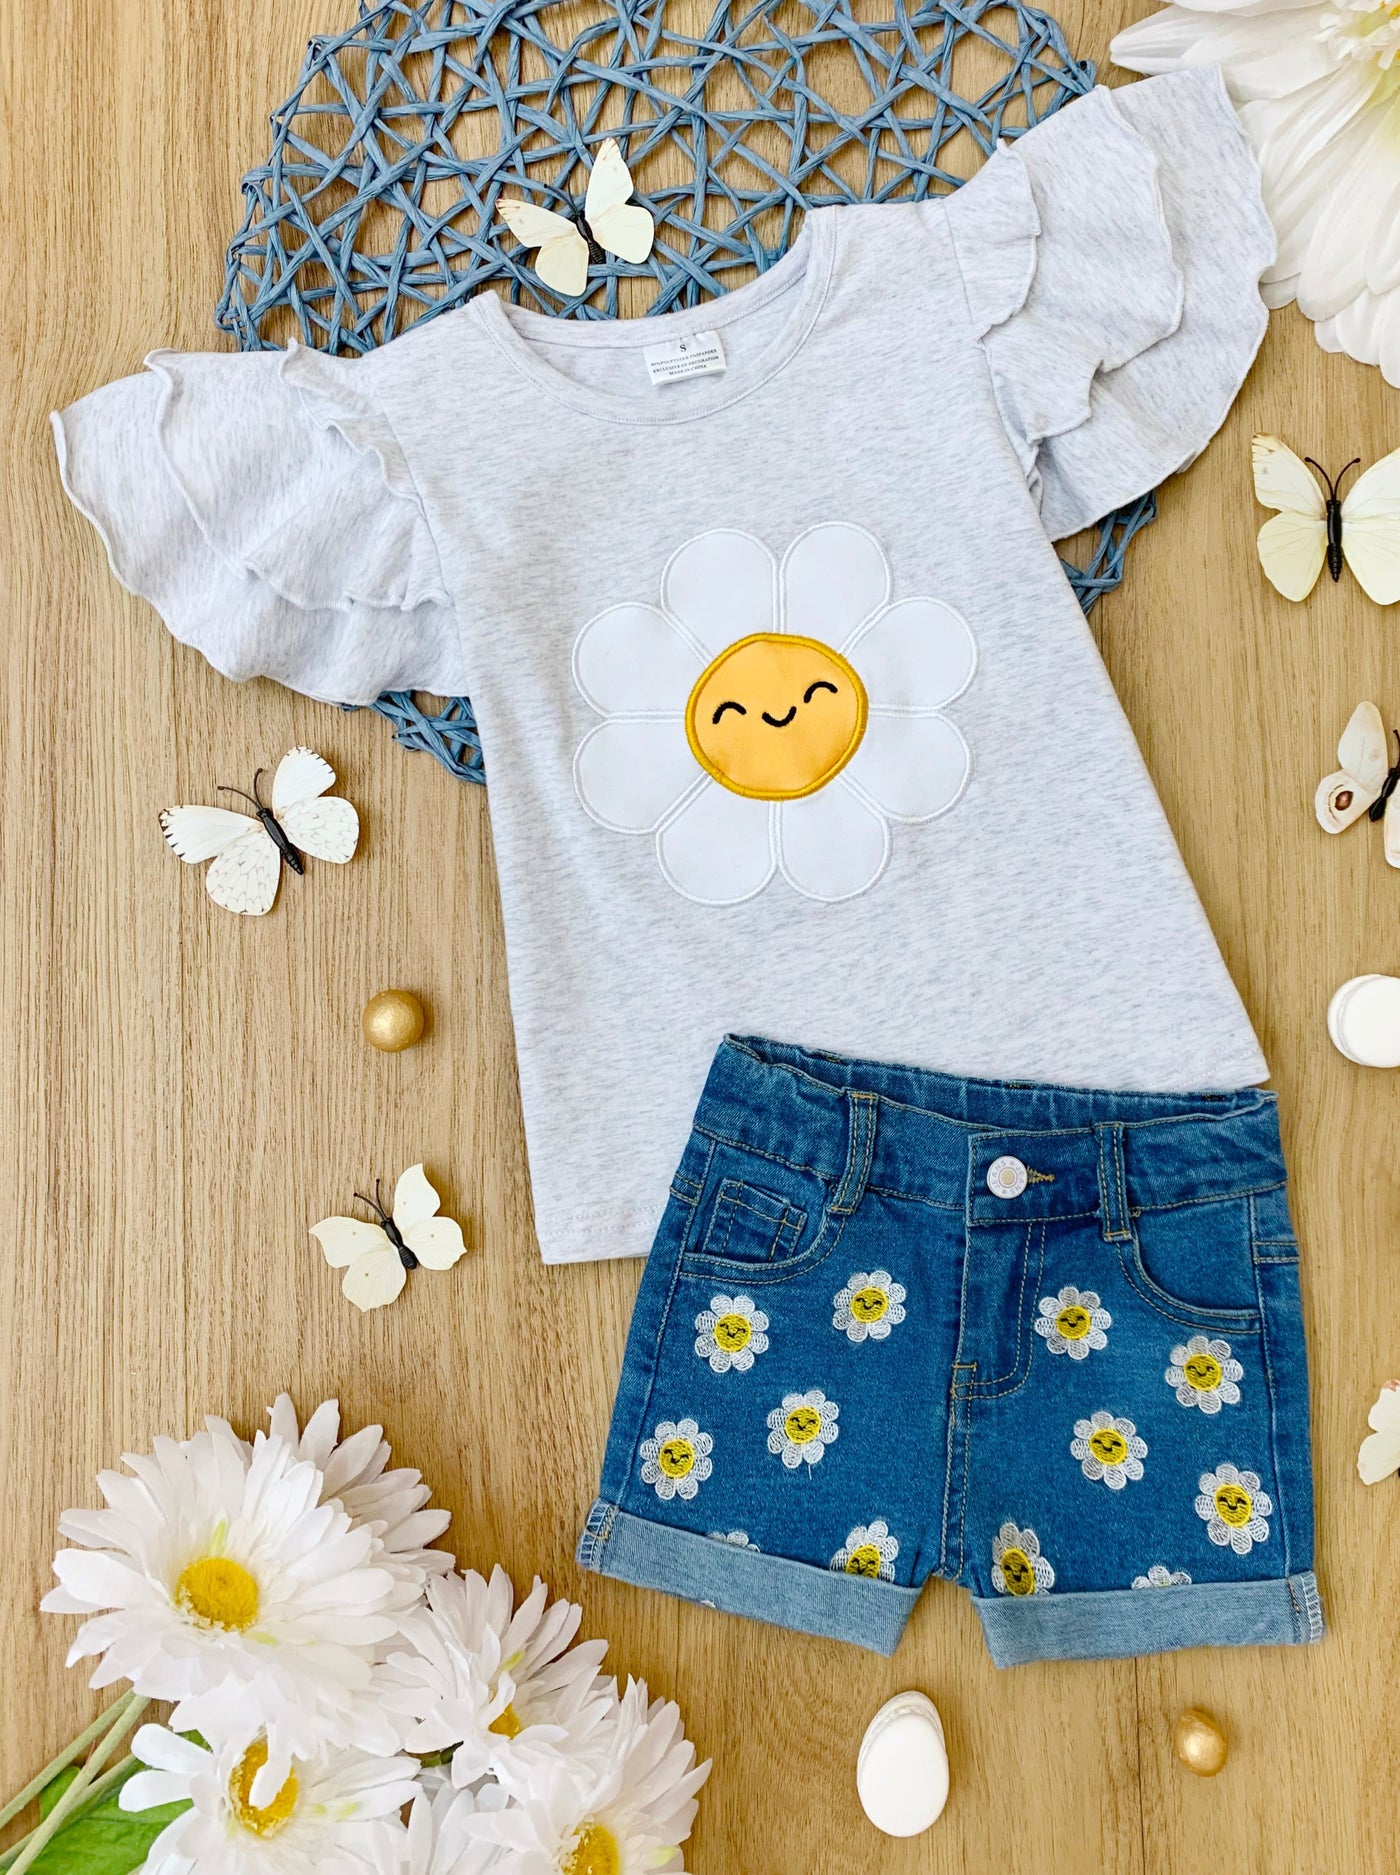 Girls "Happy Daisy" Ruffled Sleeve Top and Floral Demin Shorts Set